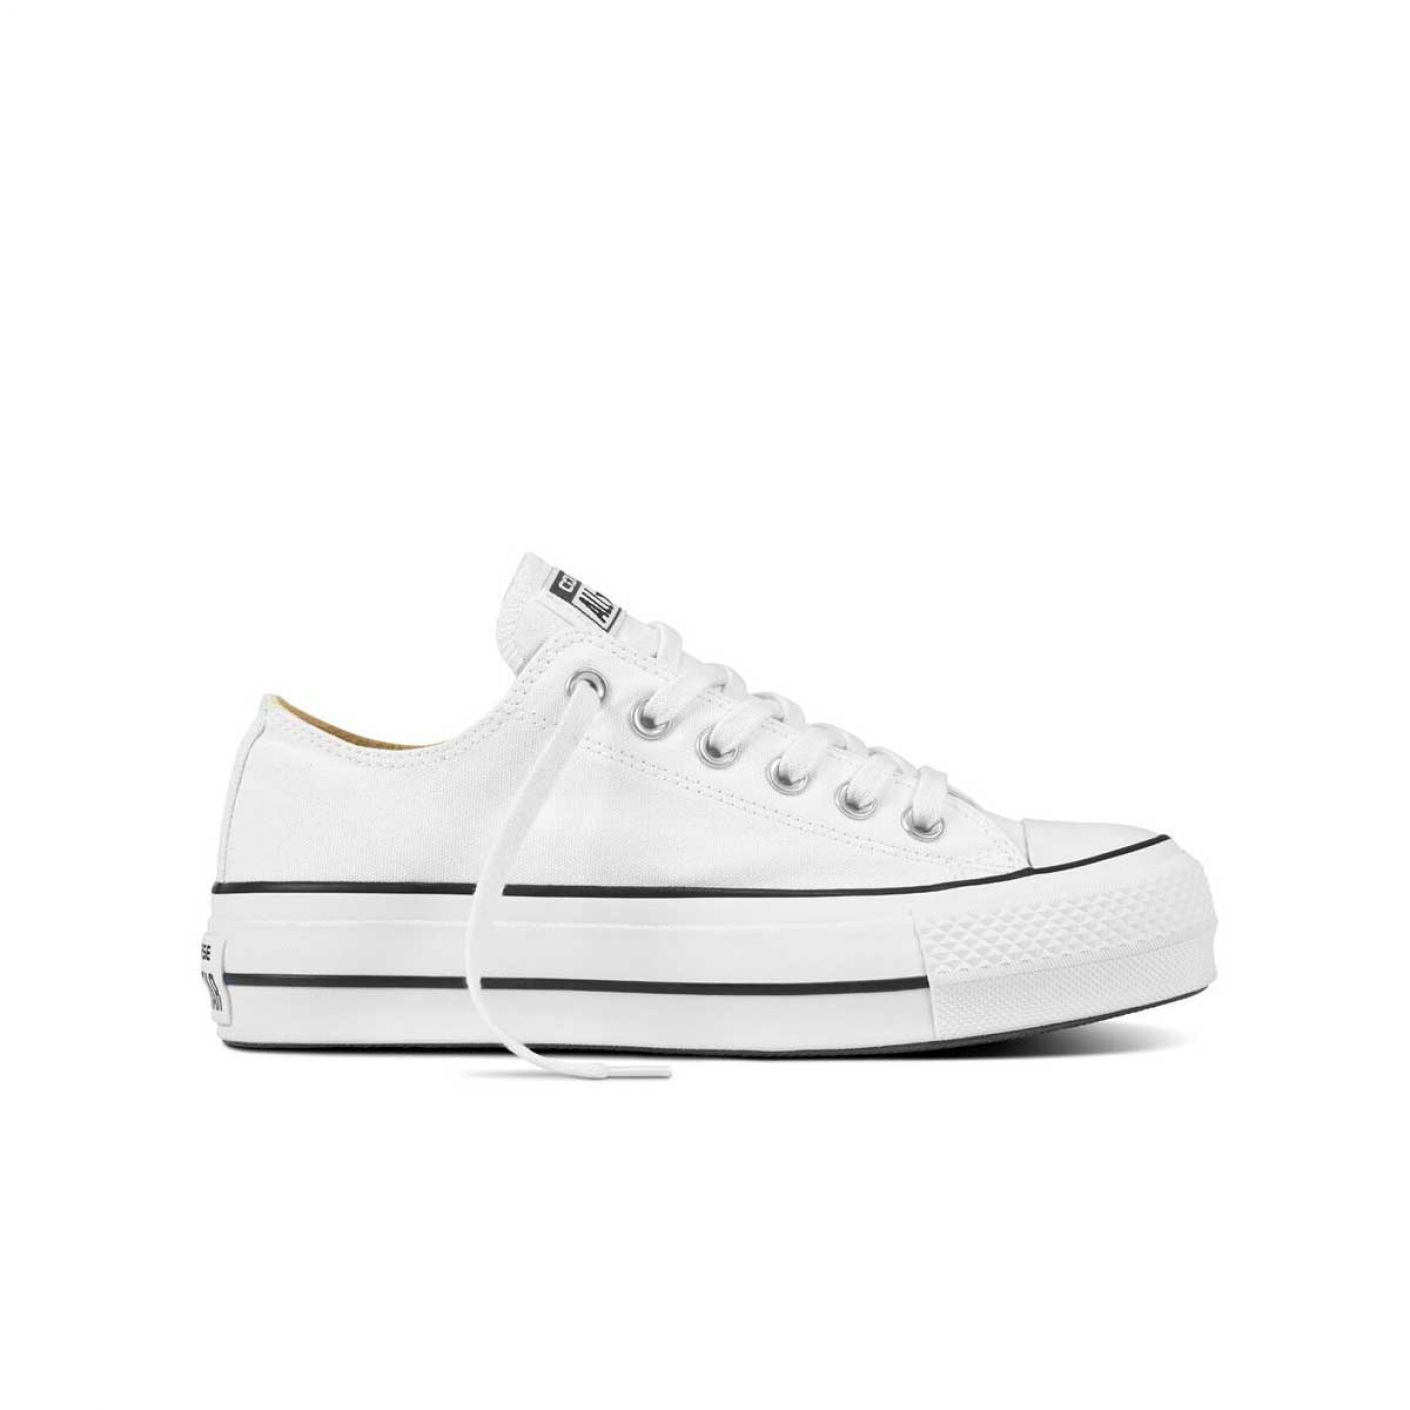 Converse Chuck Taylor All Star Platform Canvas Low Top White